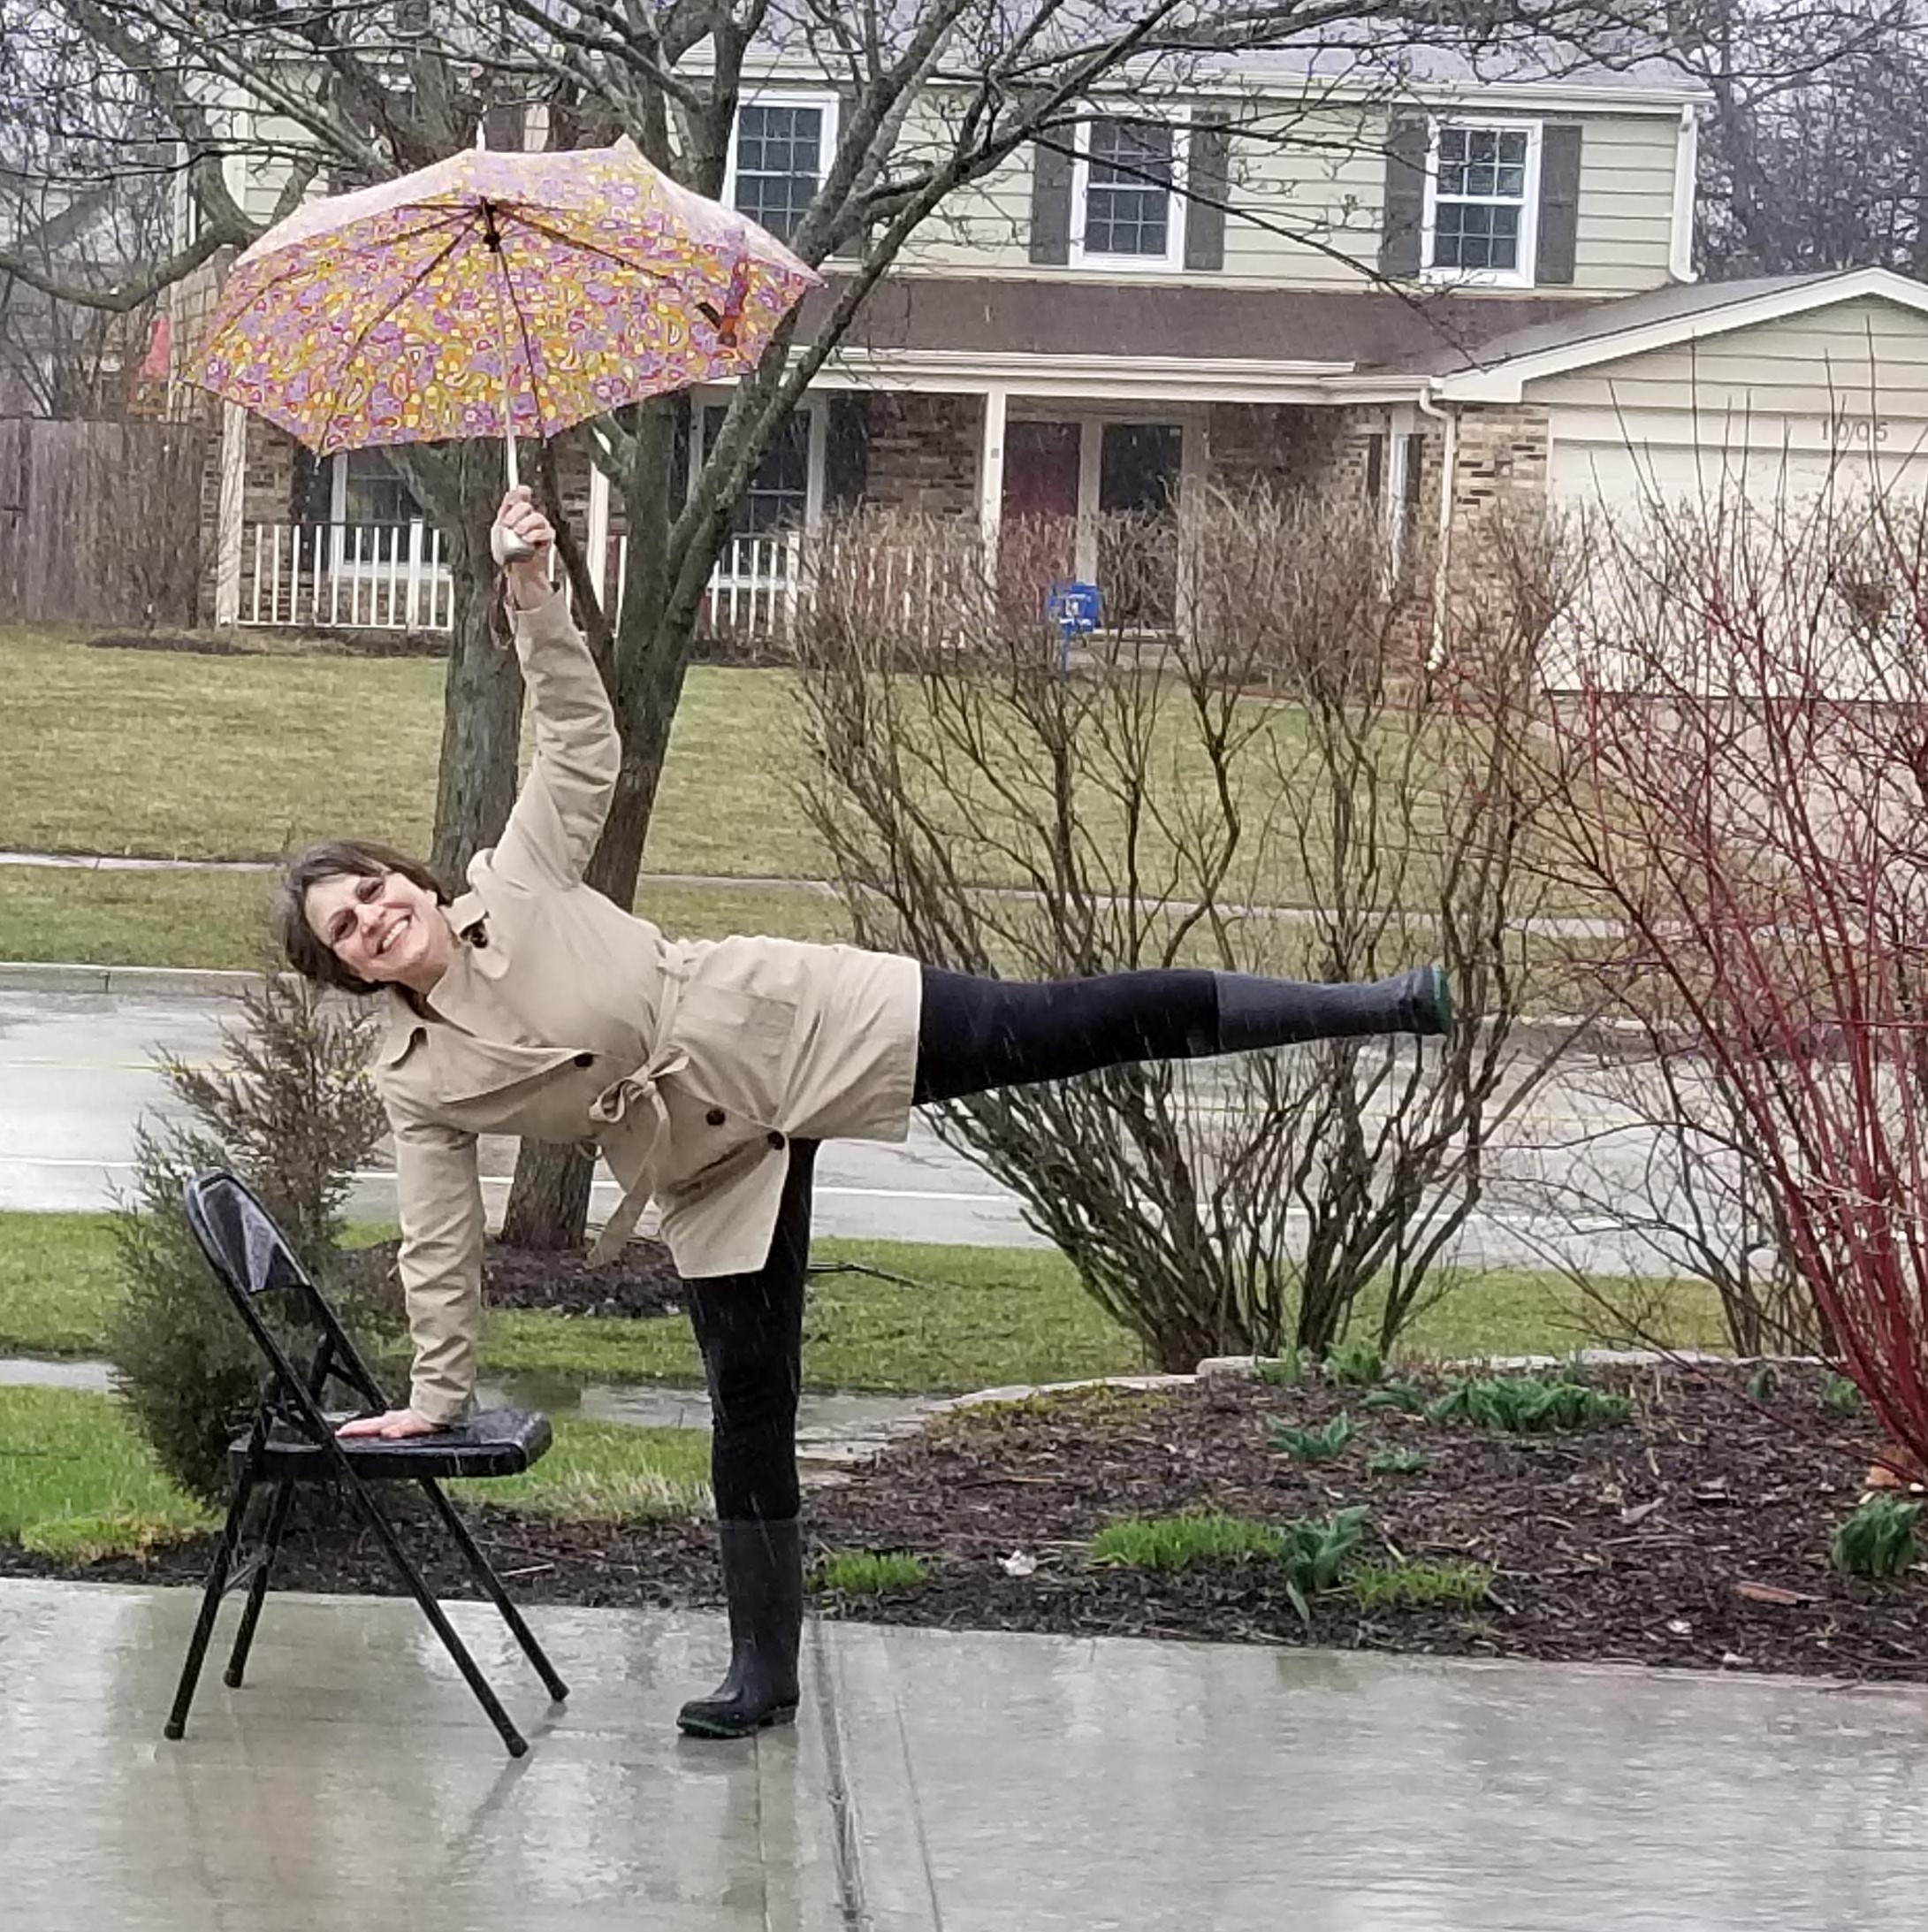 Isabel Raci yoga pose on chair holding umbrella and smiling in the rain